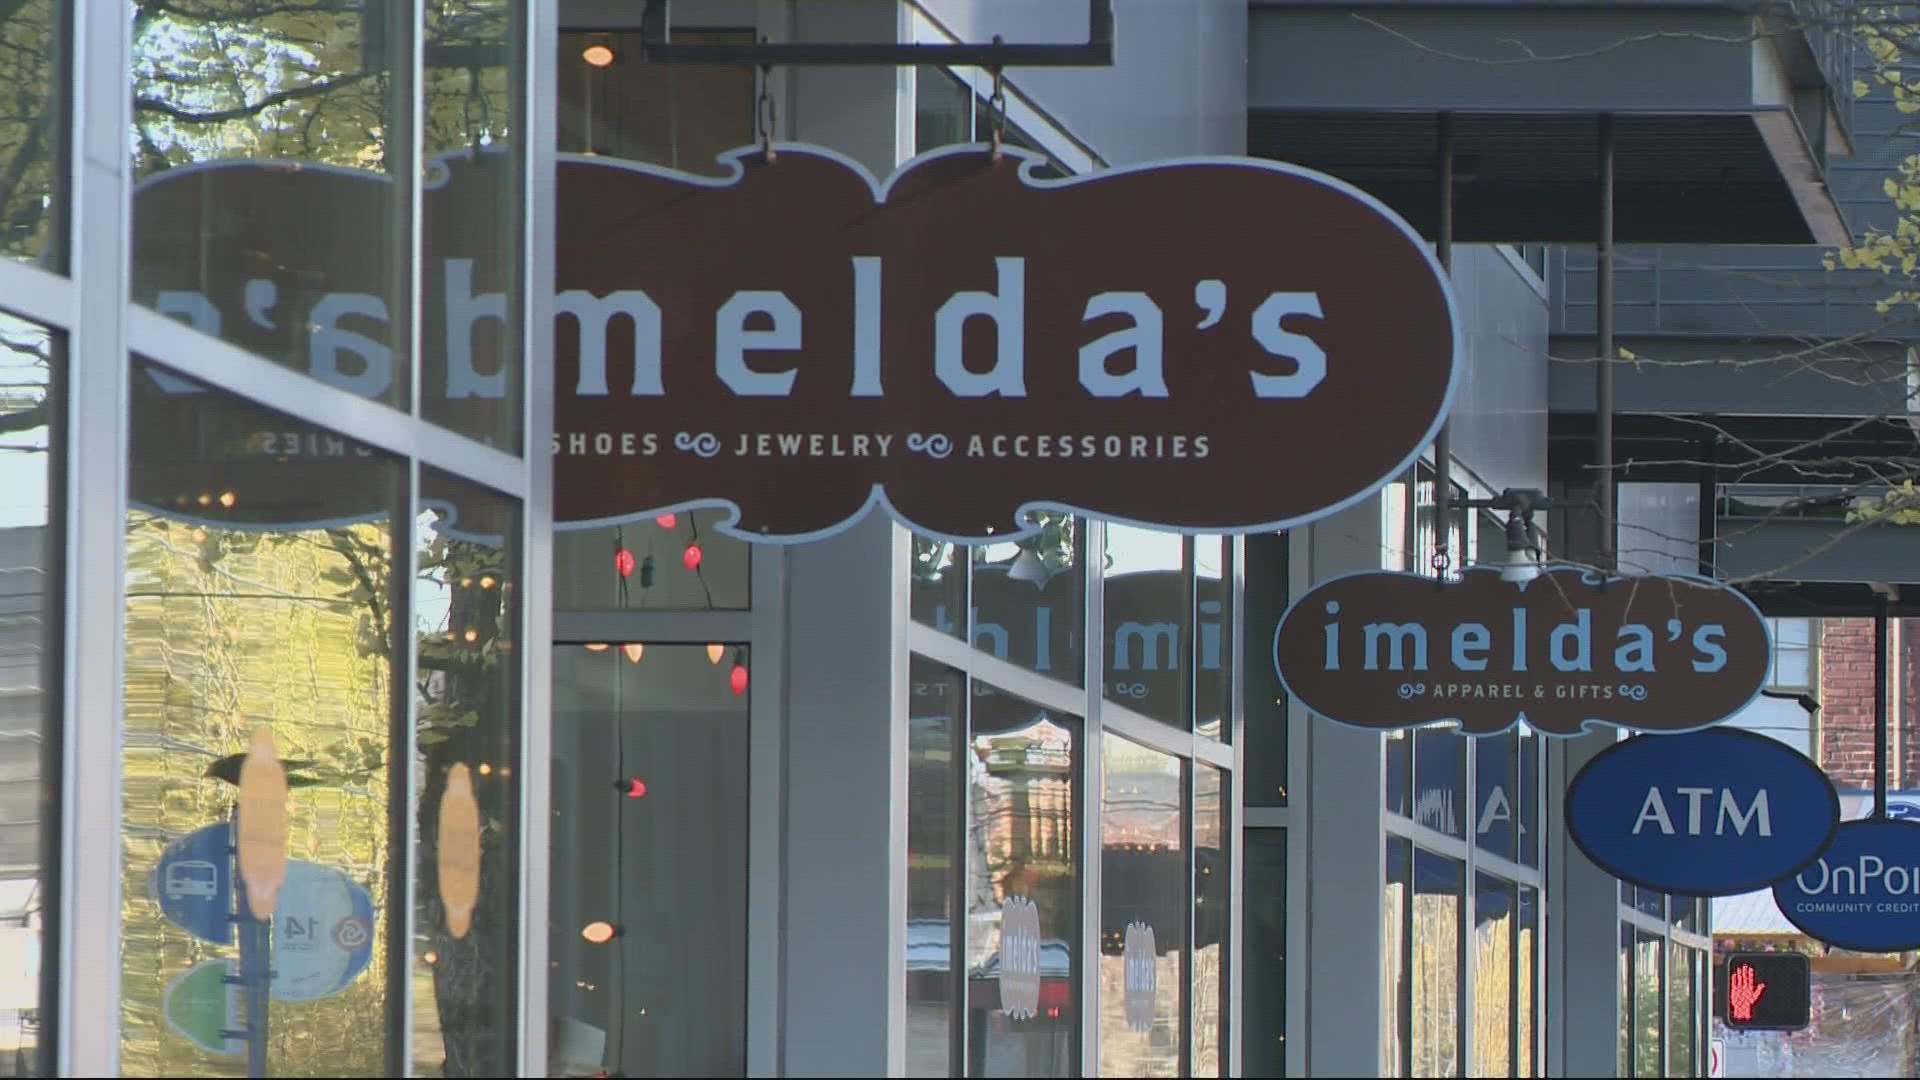 After 29 years, Imelda's shoes is shutting down shop due to hard decisions around burglaries, vandalism, pandemic, staffing and supply chain issues.